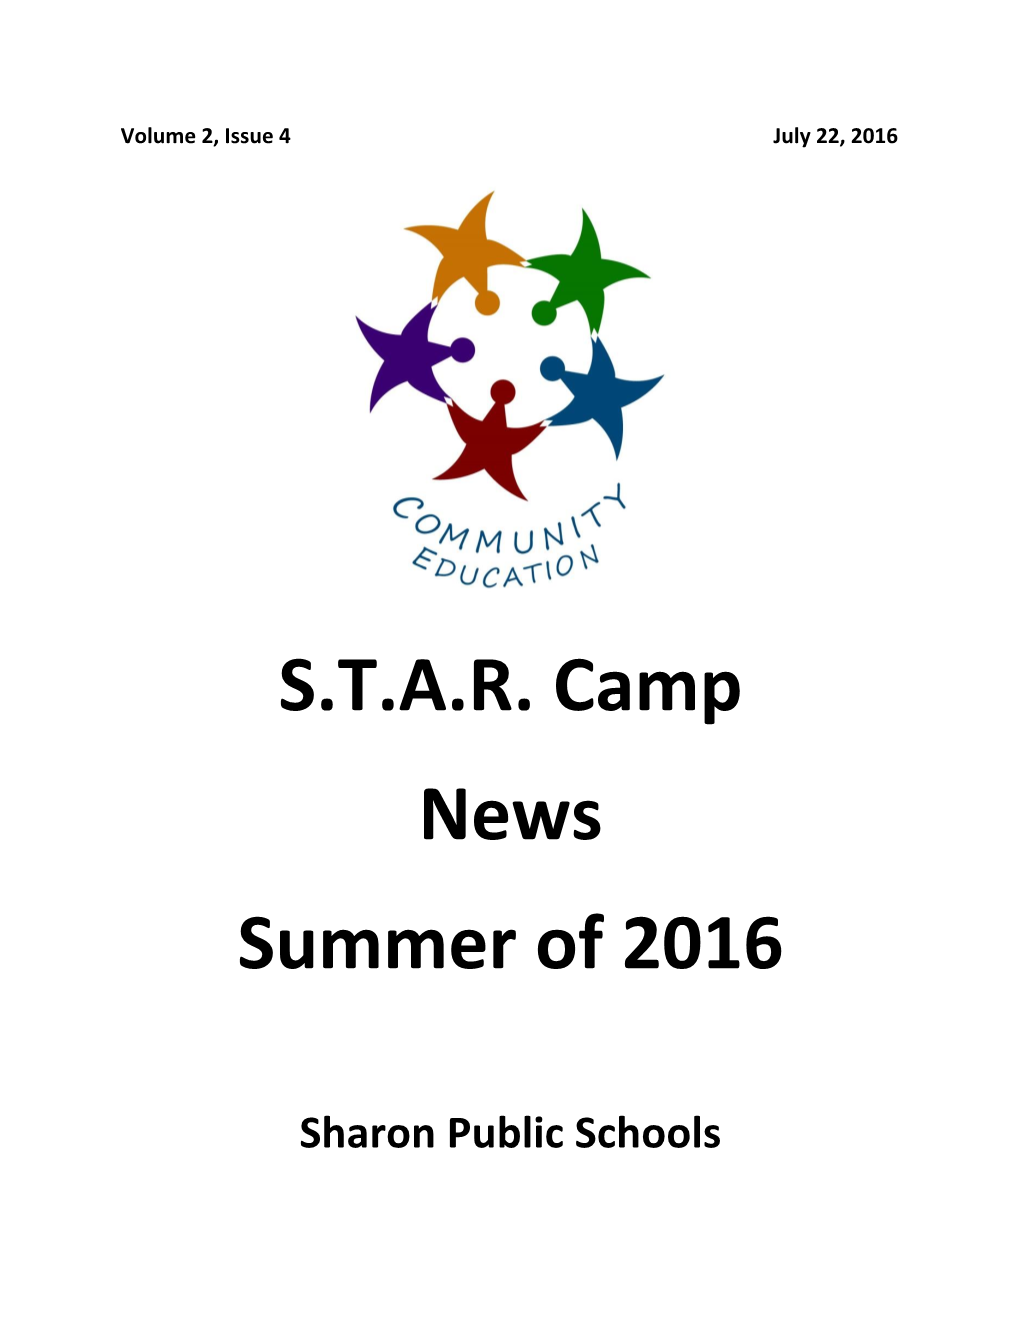 S.T.A.R. Camp News Summer of 2016